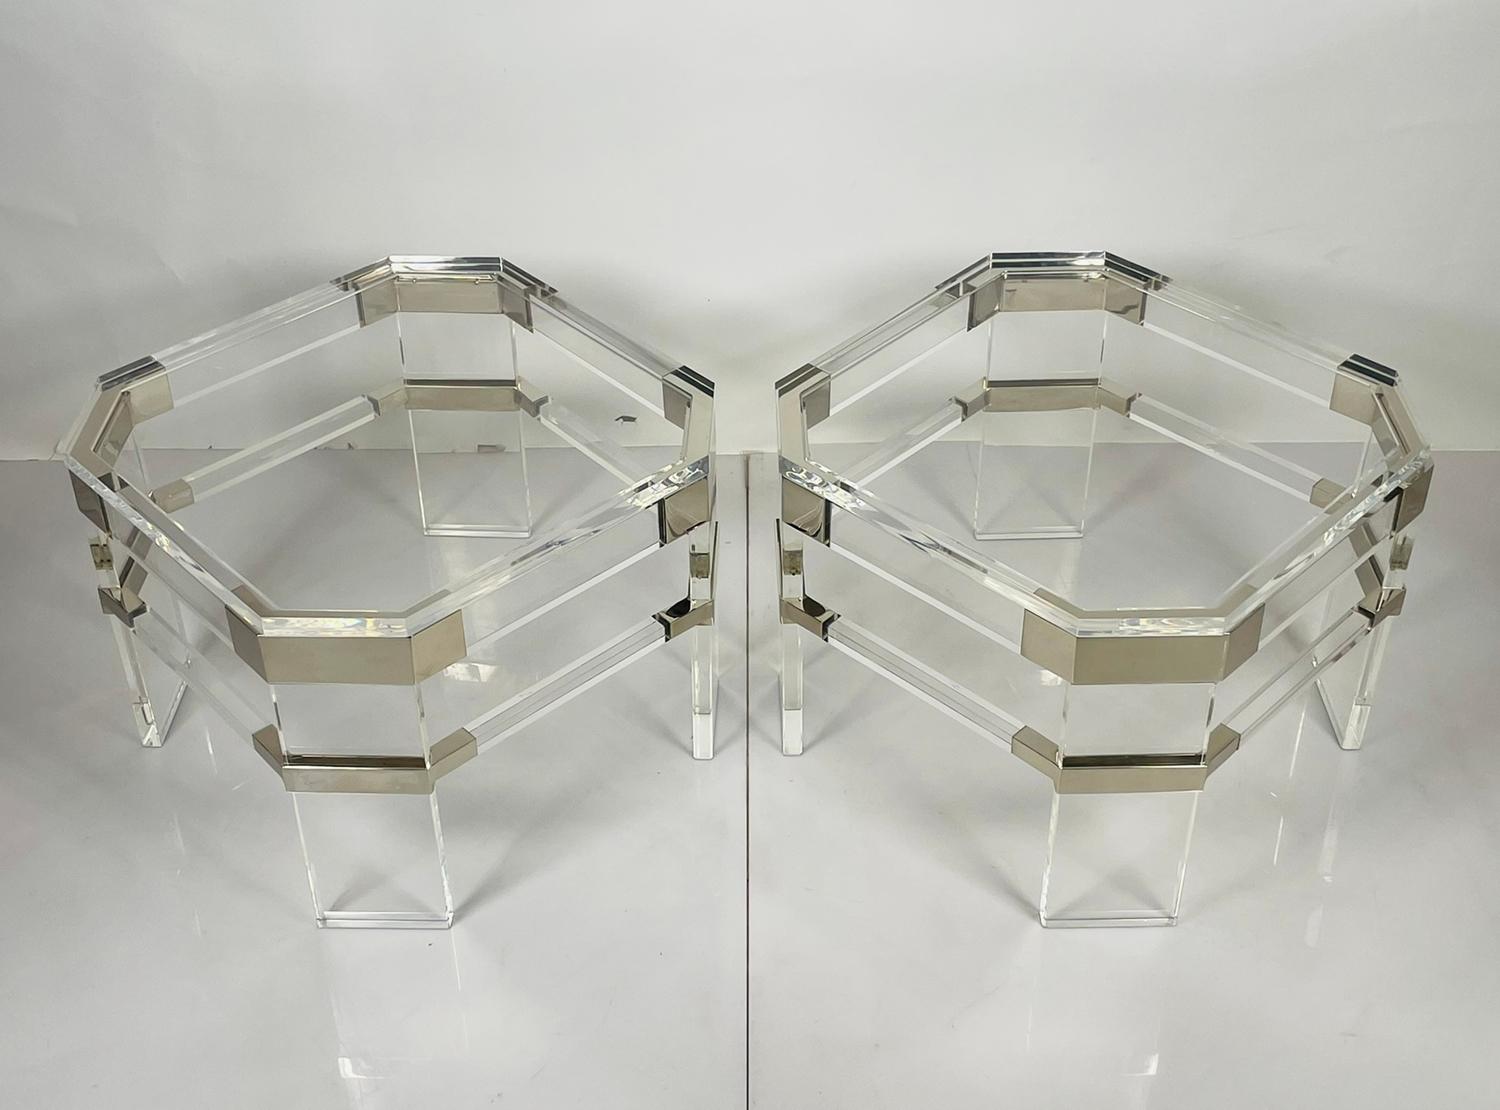 This classic vintage side tables by the famed designer shows how the clear material can have so much presence. Dubbed the 